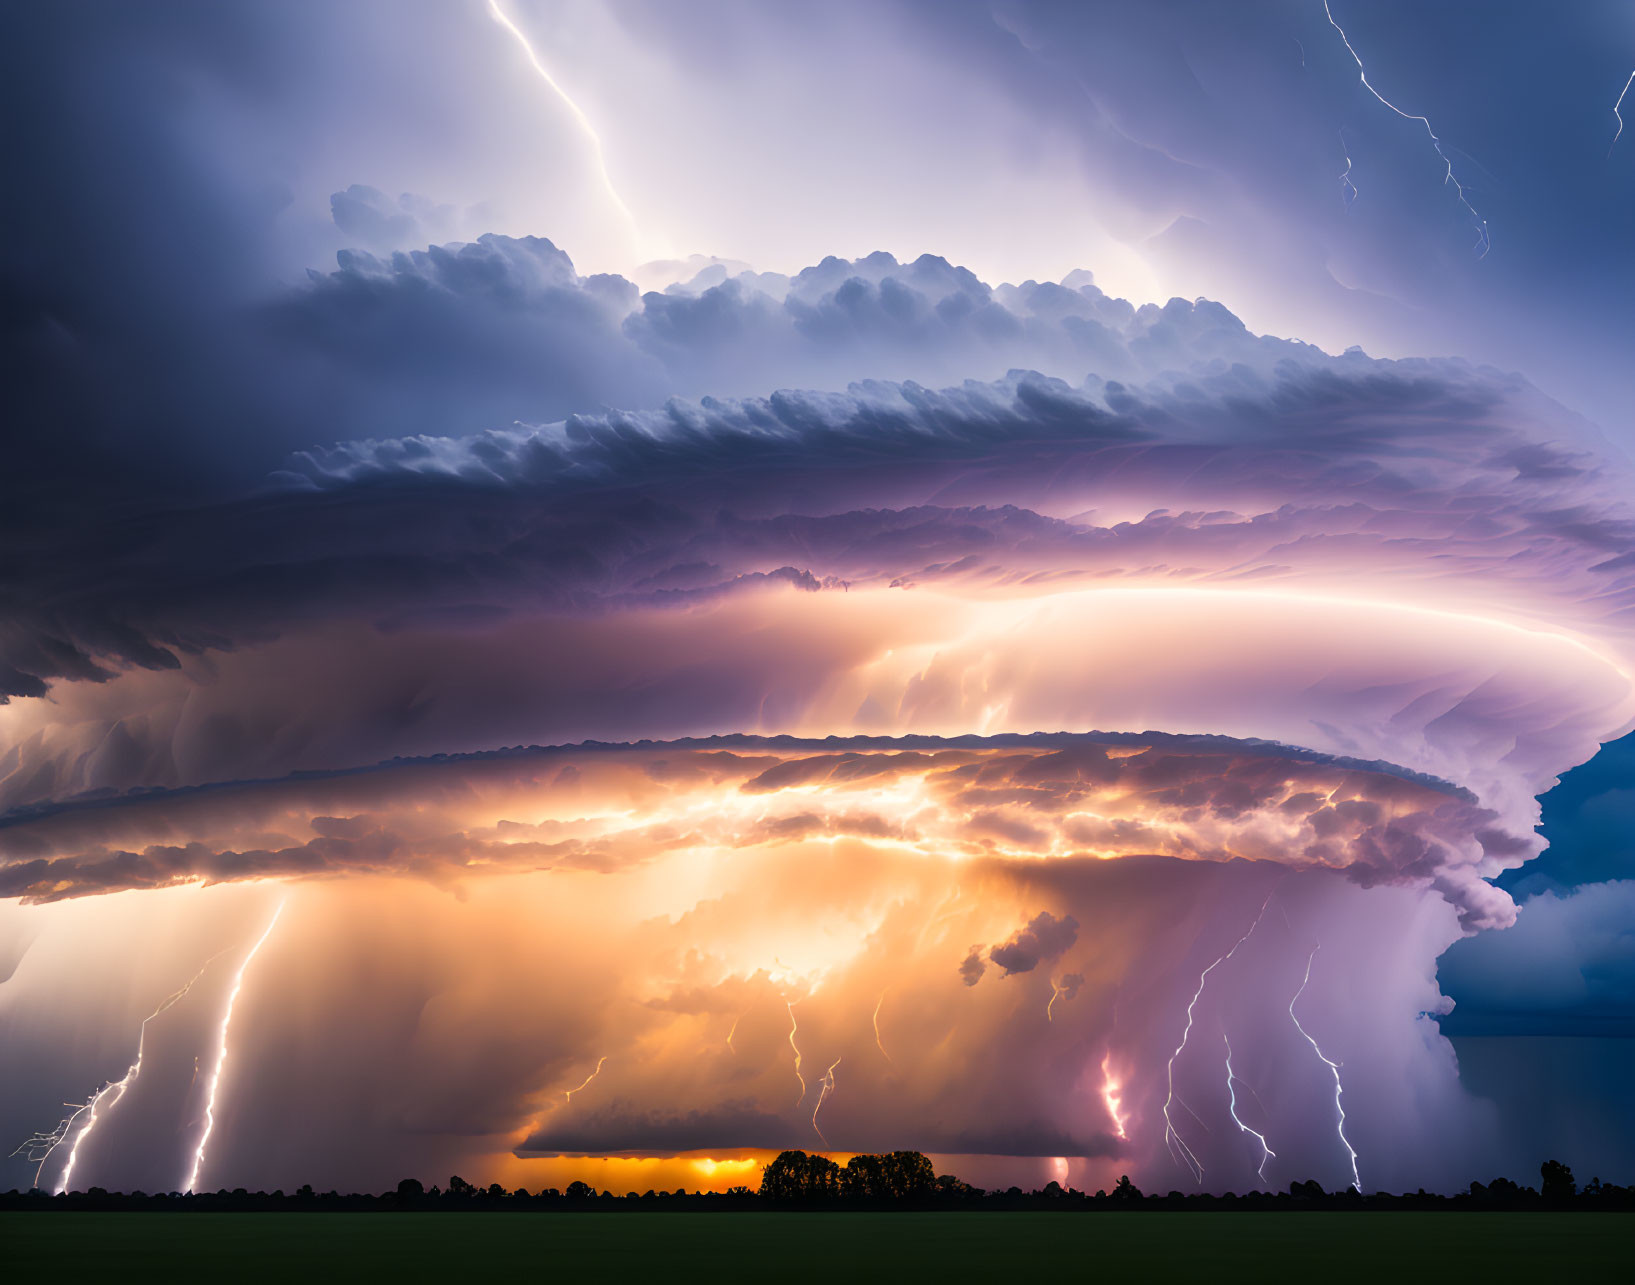 Dramatic supercell storm with vivid lightning and striking cloud formations at dusk